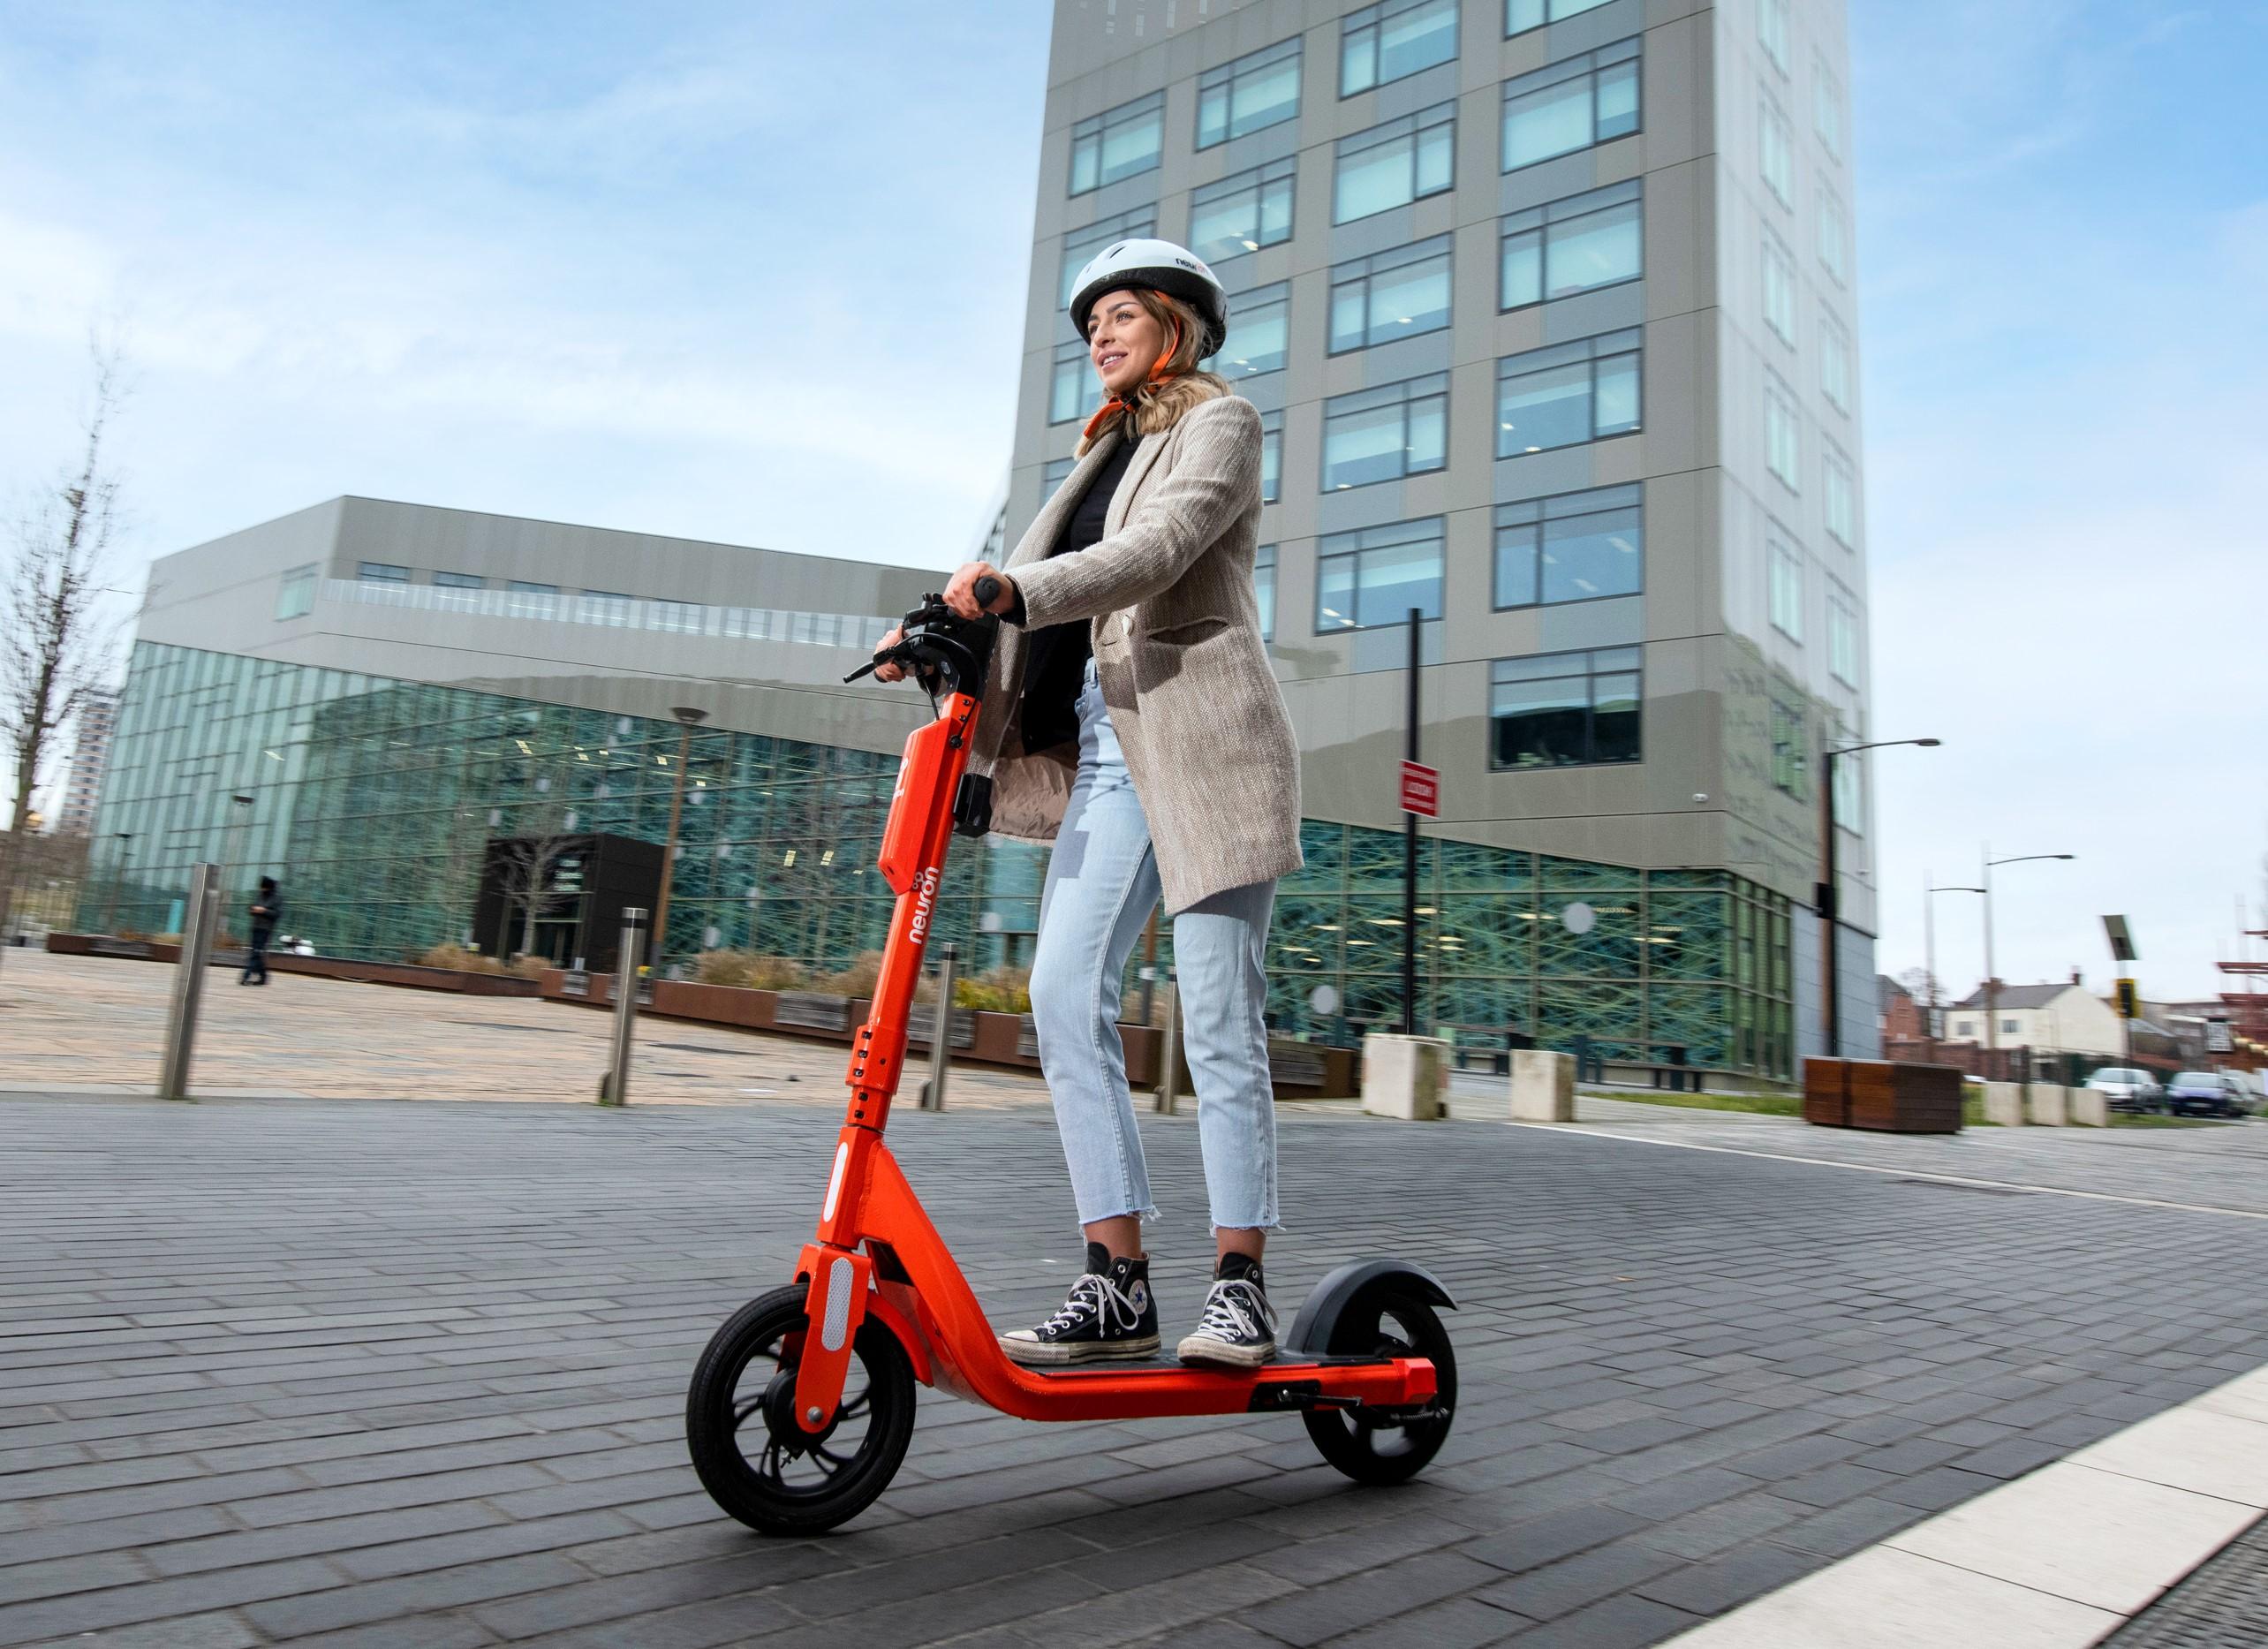 Photo showing a young woman using an orange e-scooter on a clear road with a tall building in the background. She is wearing light coloured clothing and a white helmet.